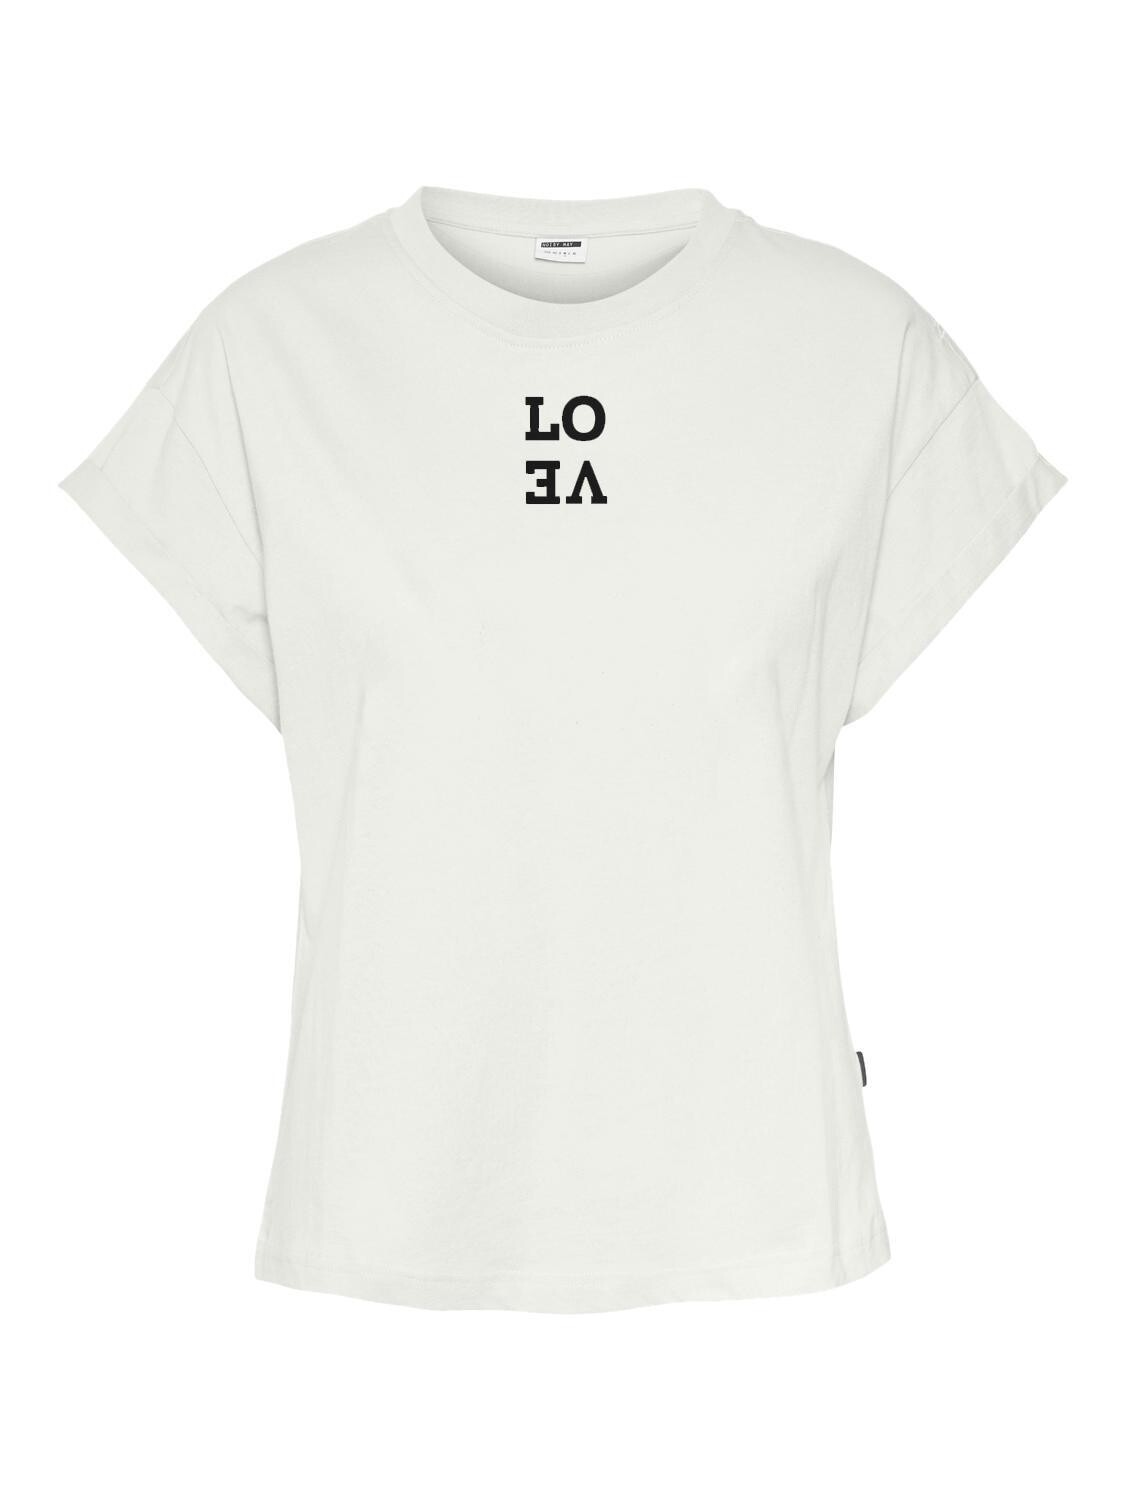 NMABBIE QUOTE S/S O-NECK T-SHIRT Bright White-LOVE